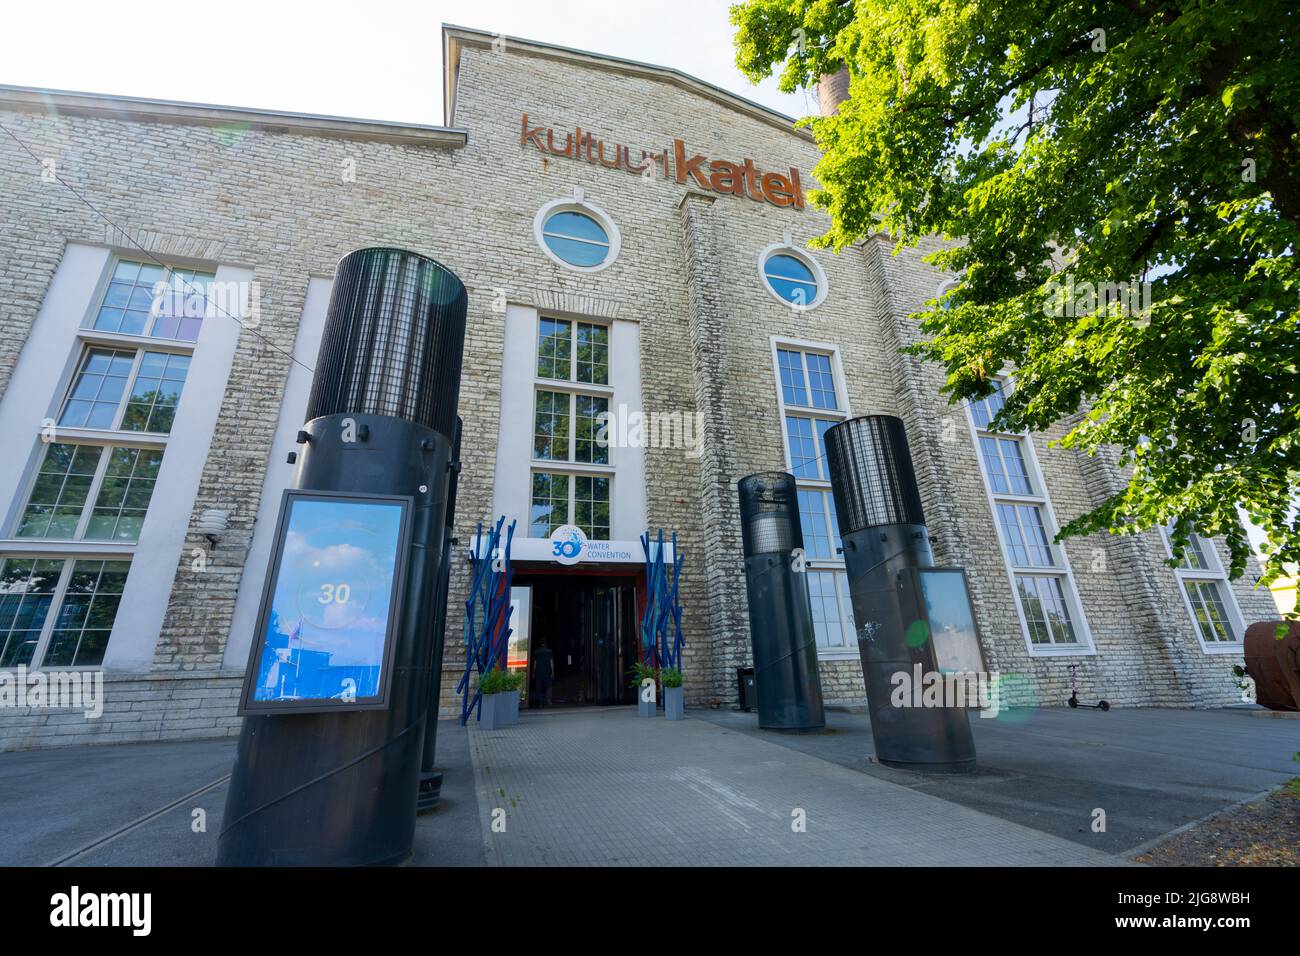 Tallinn, Estonia. July 2022.  exterior view of the Kultuurikatel Cultural Center building in the city center Stock Photo